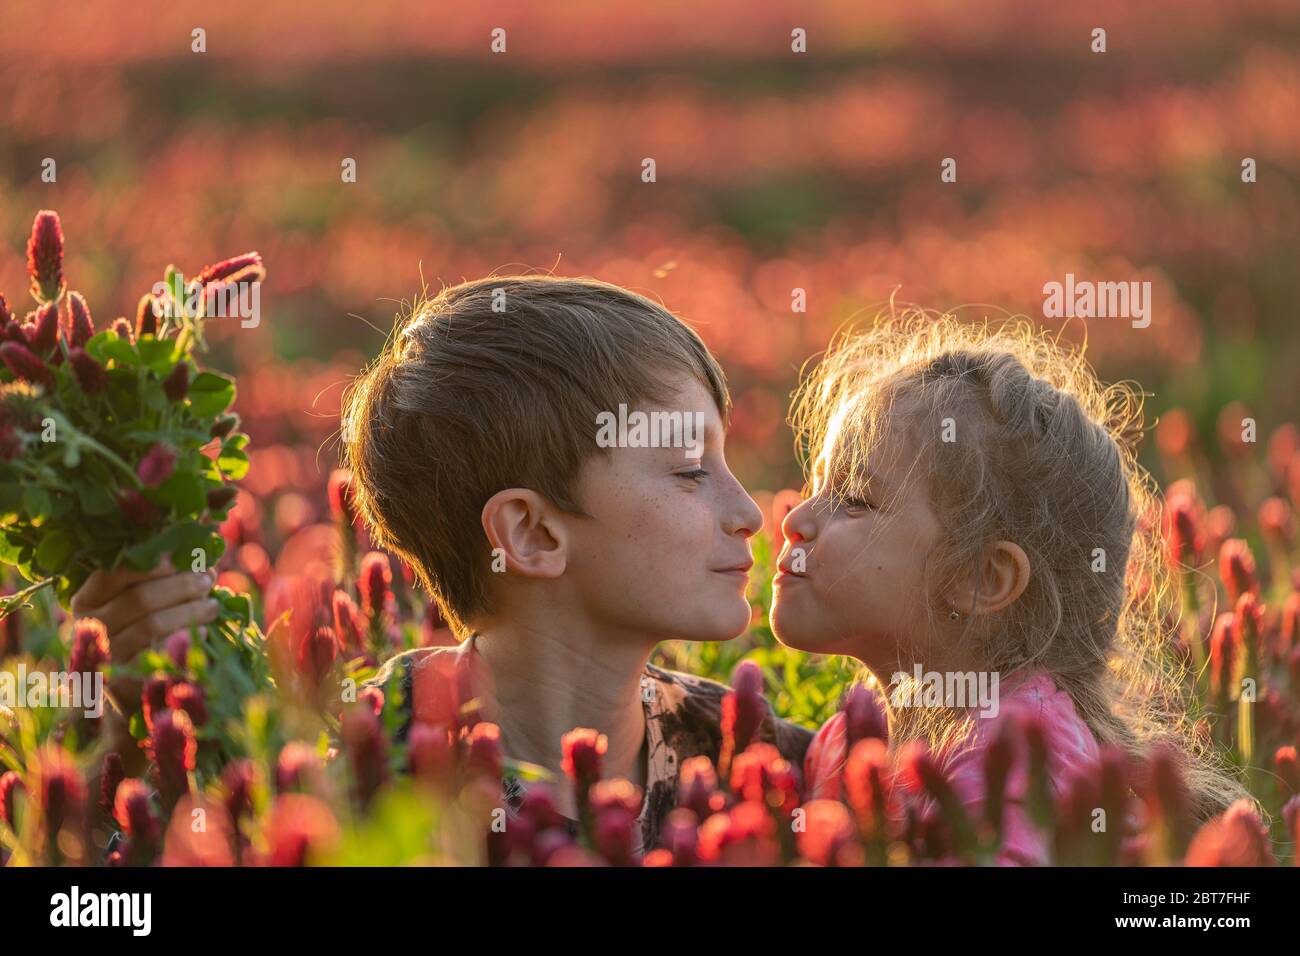 Small boy and girl kissing them self in the clover field. Cute love. Adorable scene. Stock Photo